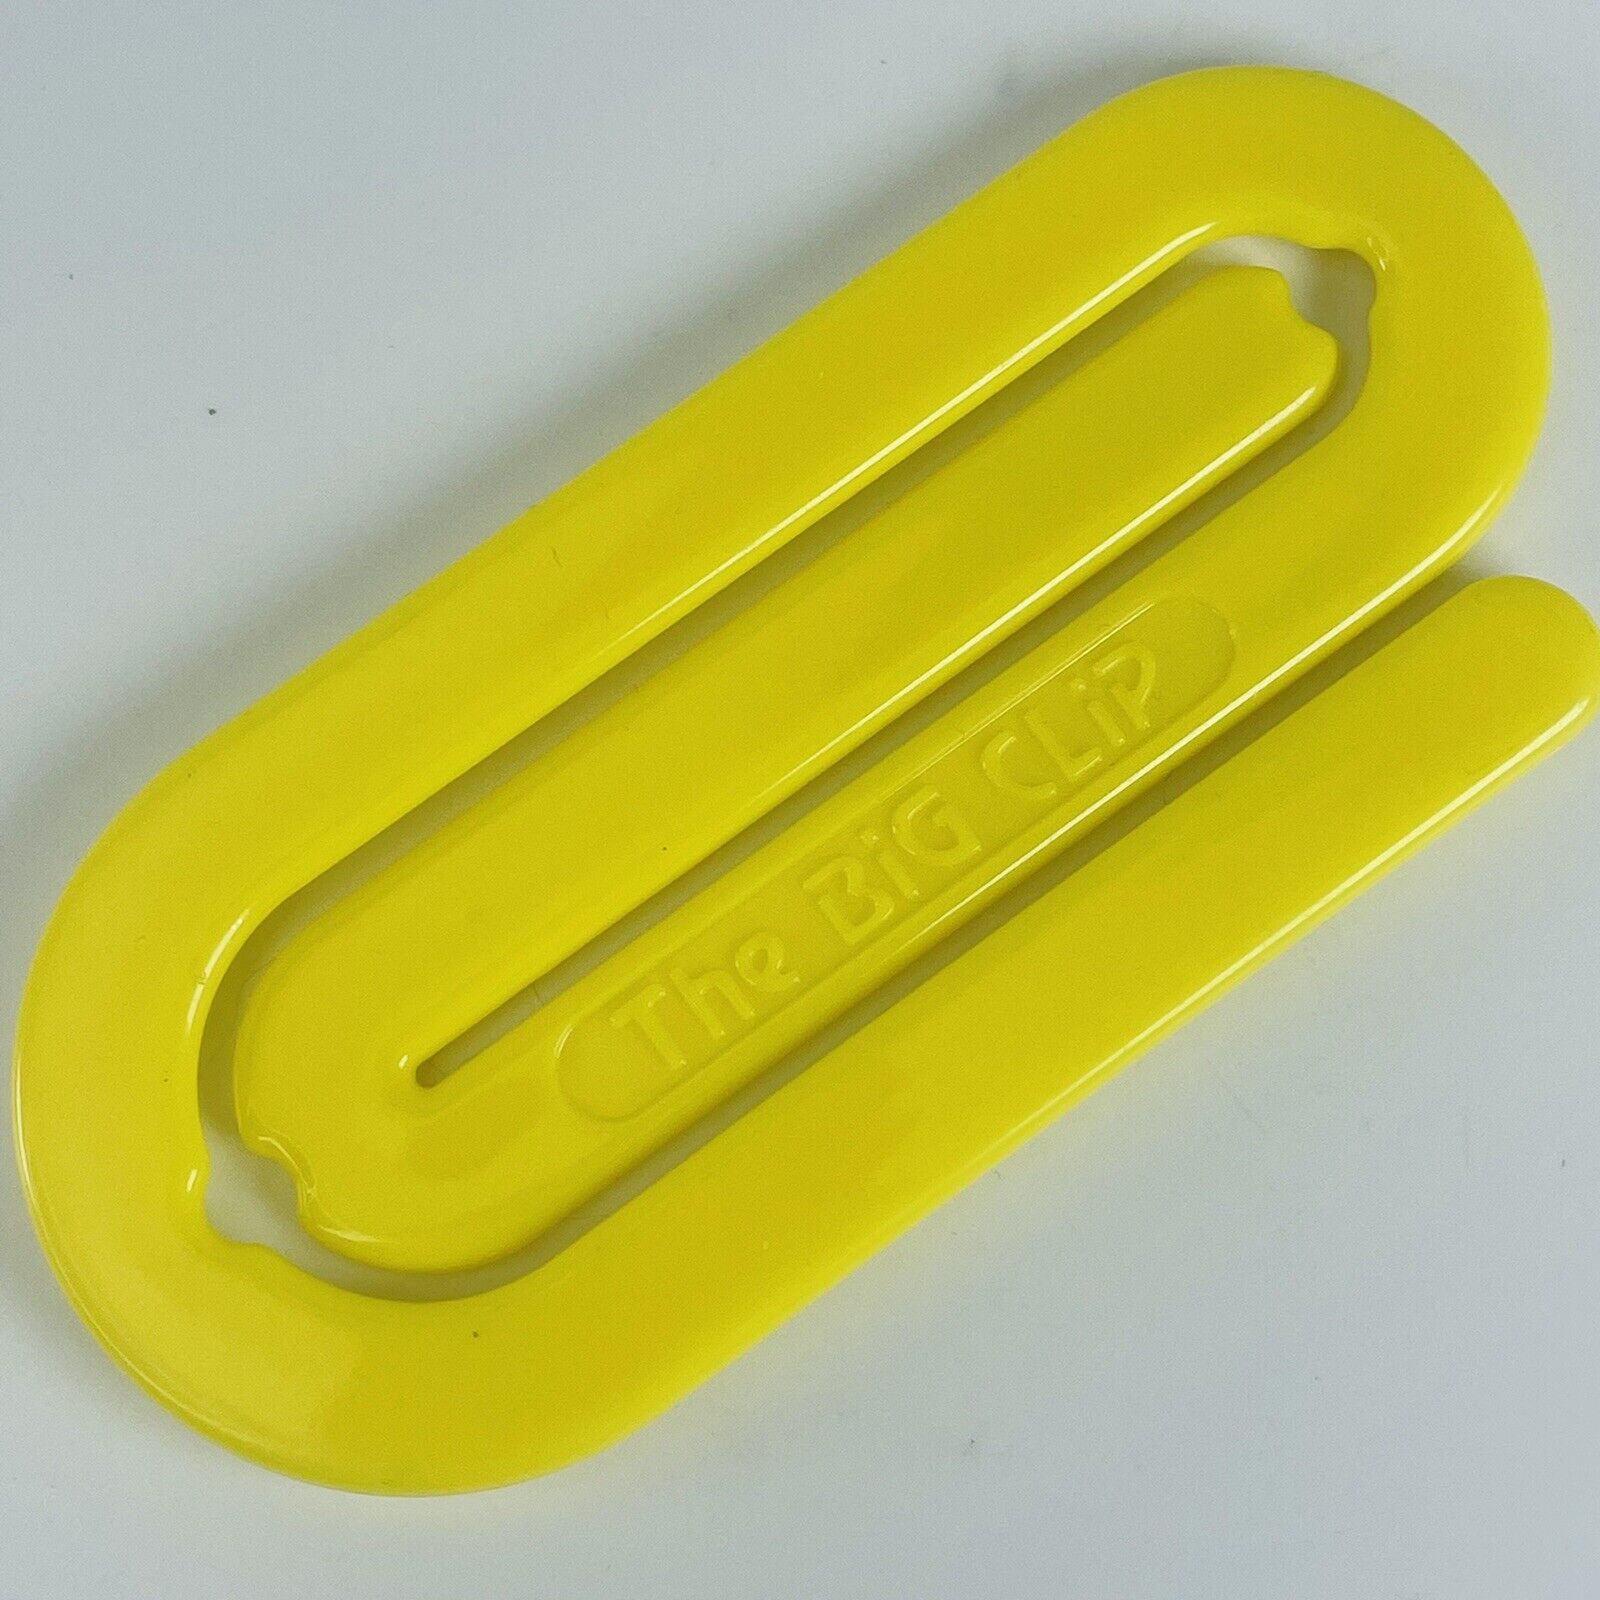 The Big Clip Jumbo Plastic Paperclip Large Glossy Yellow 1980s Hold Office Paper